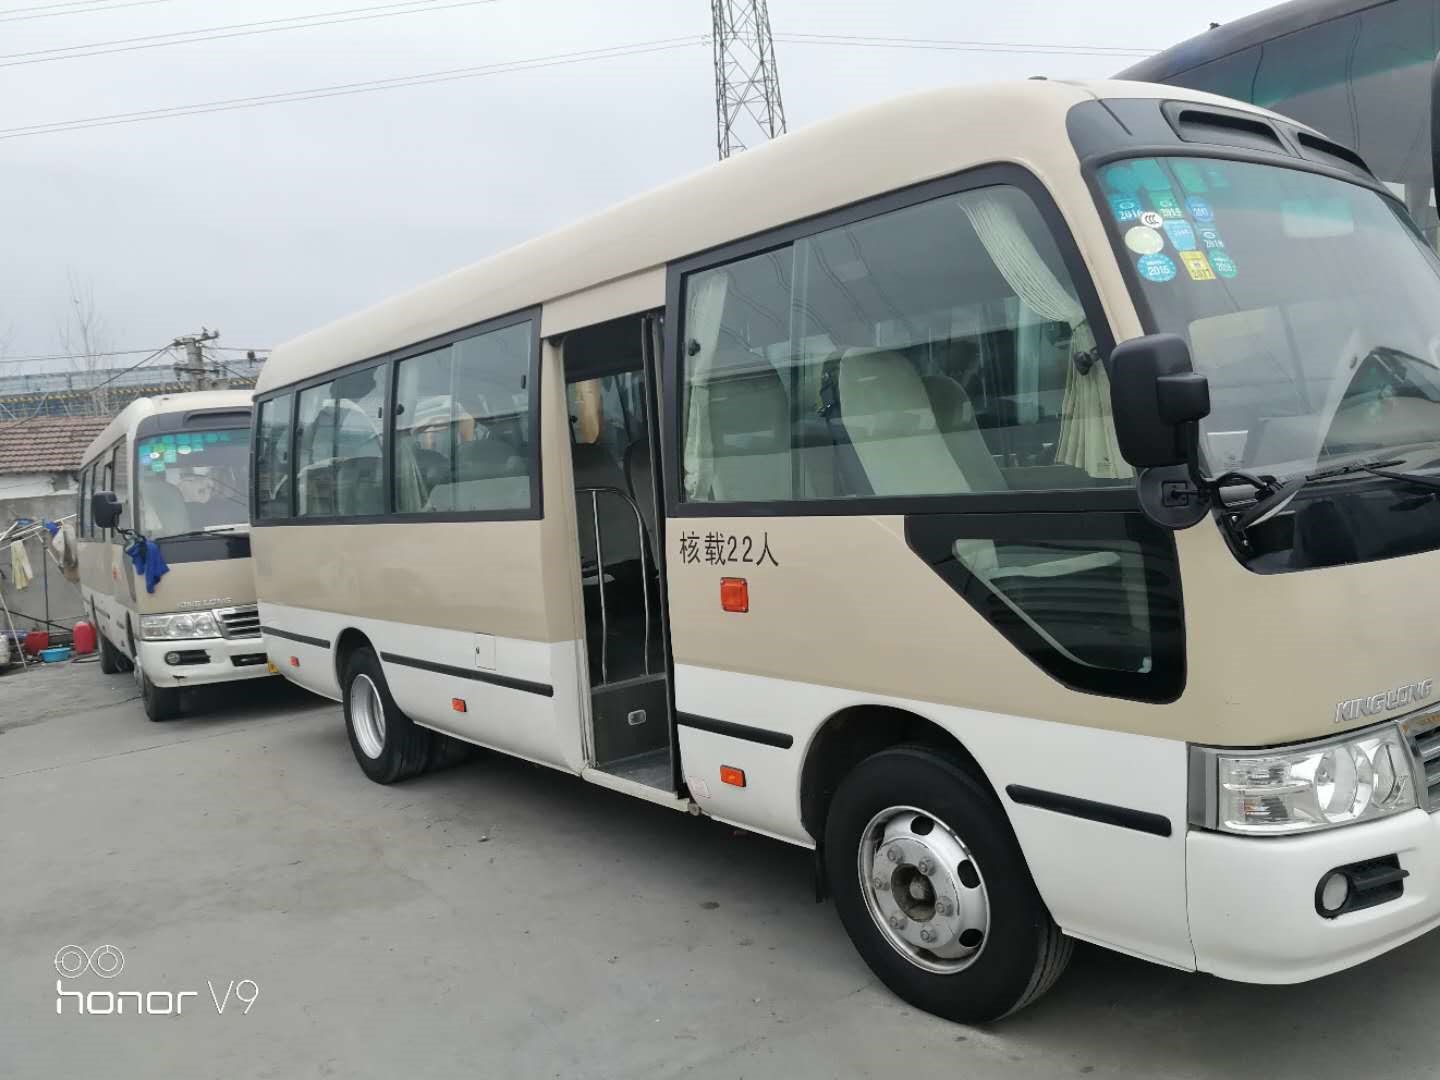 22 Seats Second Hand Toyota Coaster Bus , 2013 Year Toyota Coaster Used 